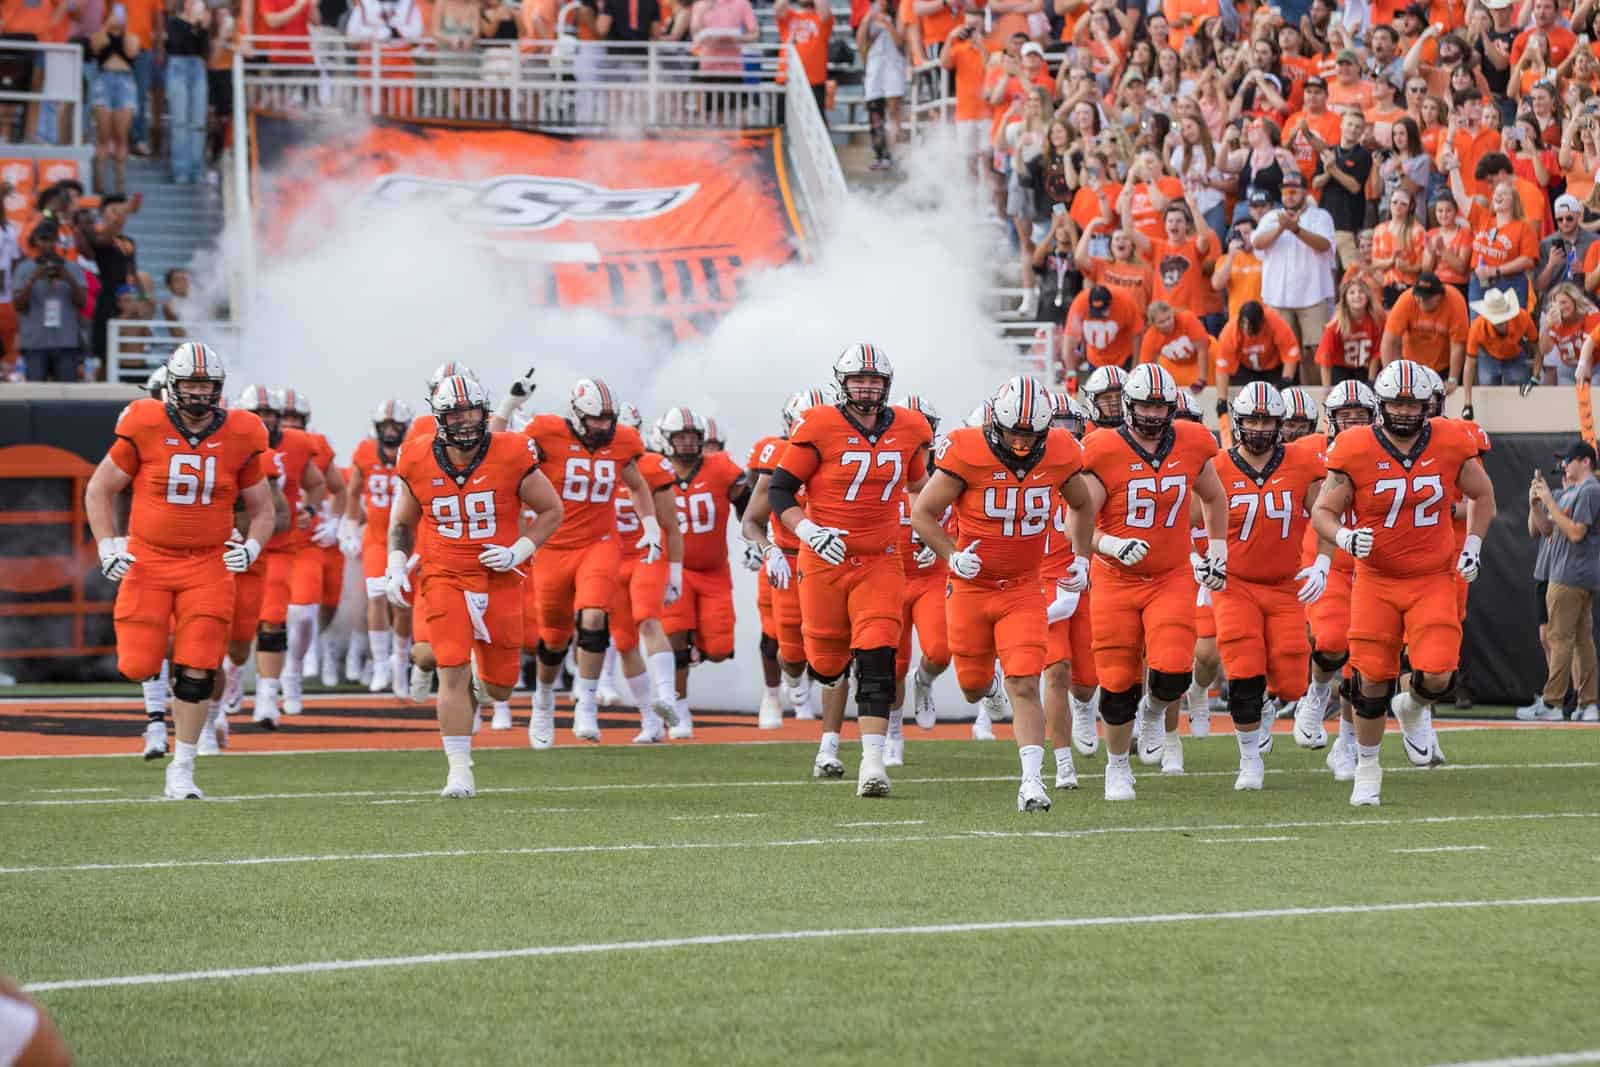 Poll: How Much Do You Earn From osu sports?